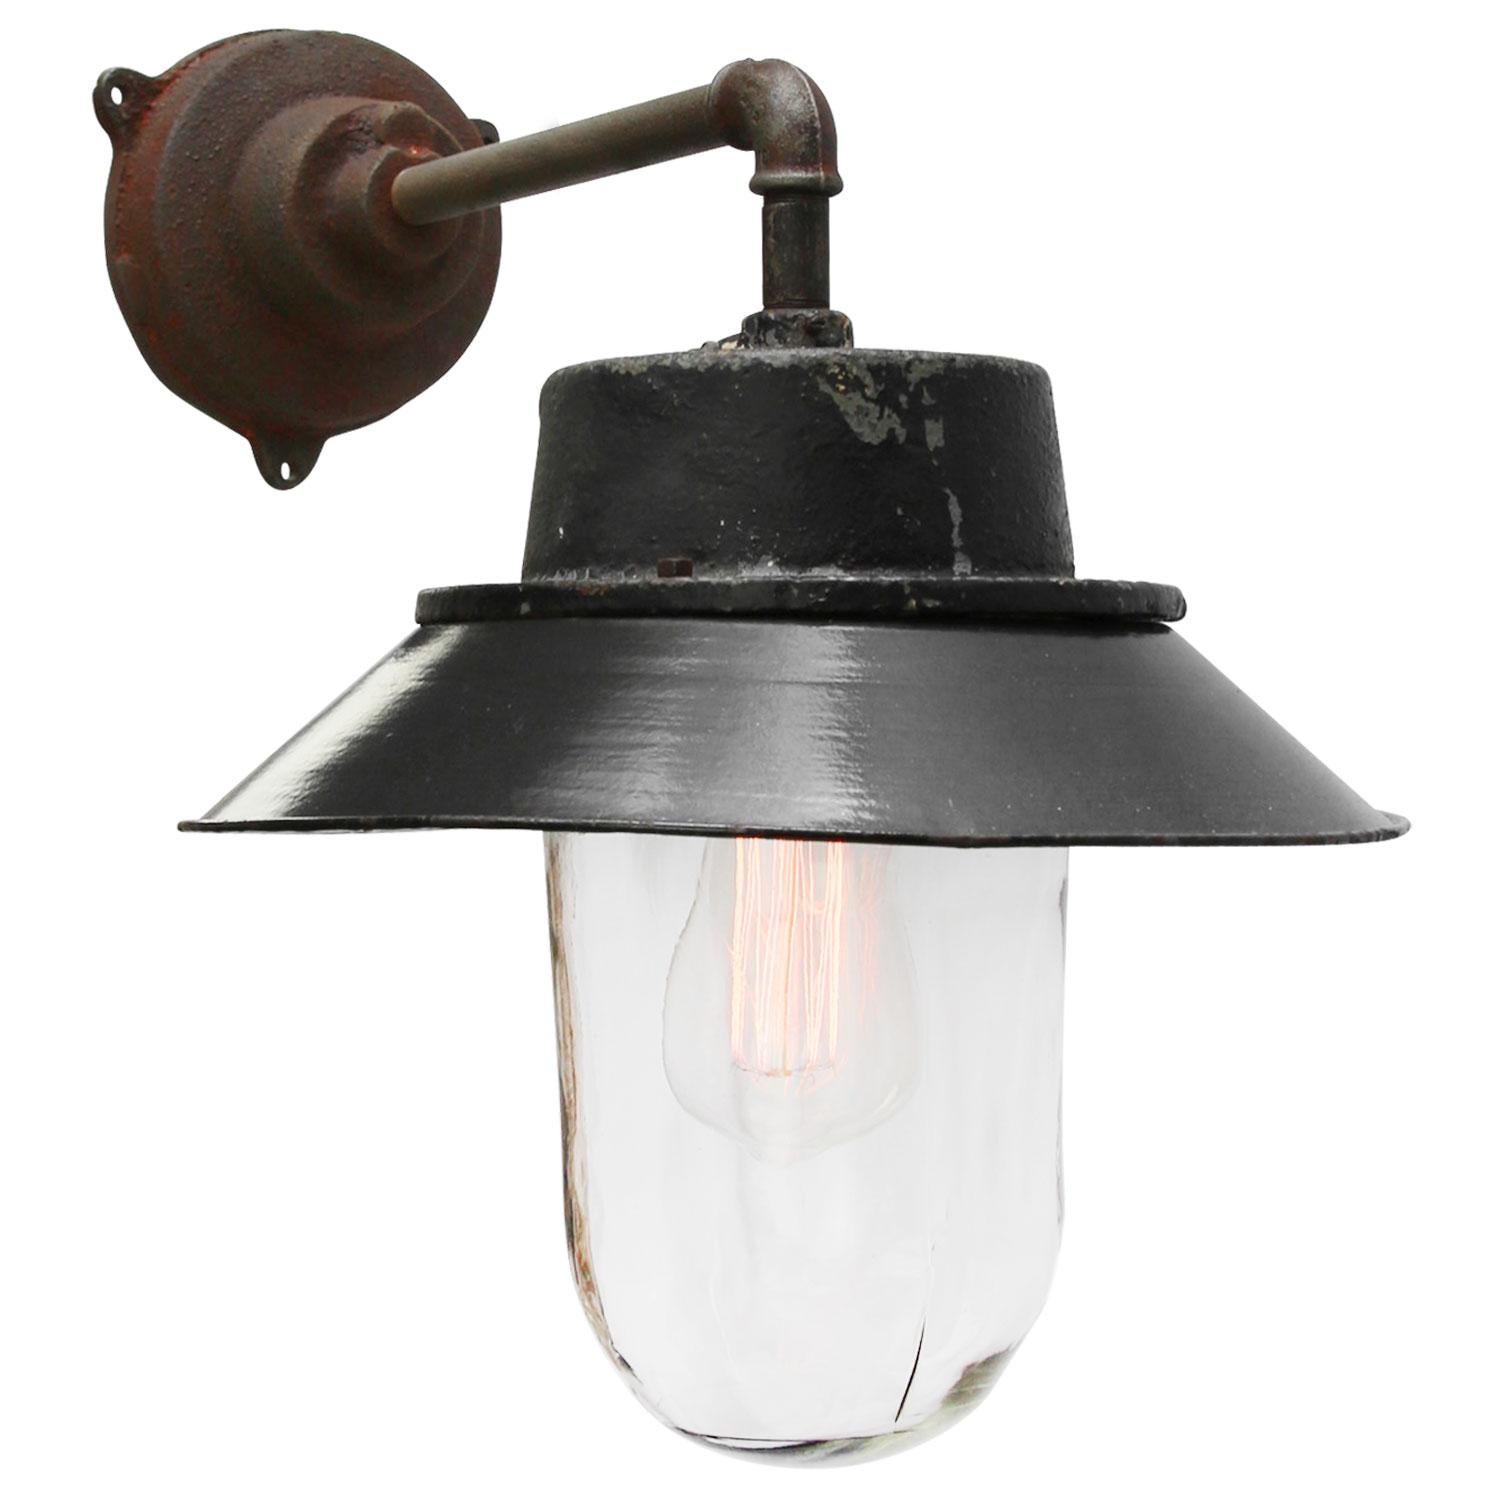 Black enamel industrial wall light. 
Black painted cast iron top.
Clear glass. 

Diameter cast iron wall piece: 12 cm. Three holes to secure.

Weight: 6.5 kg / 14.3 lb

Priced per individual item. All lamps have been made suitable by